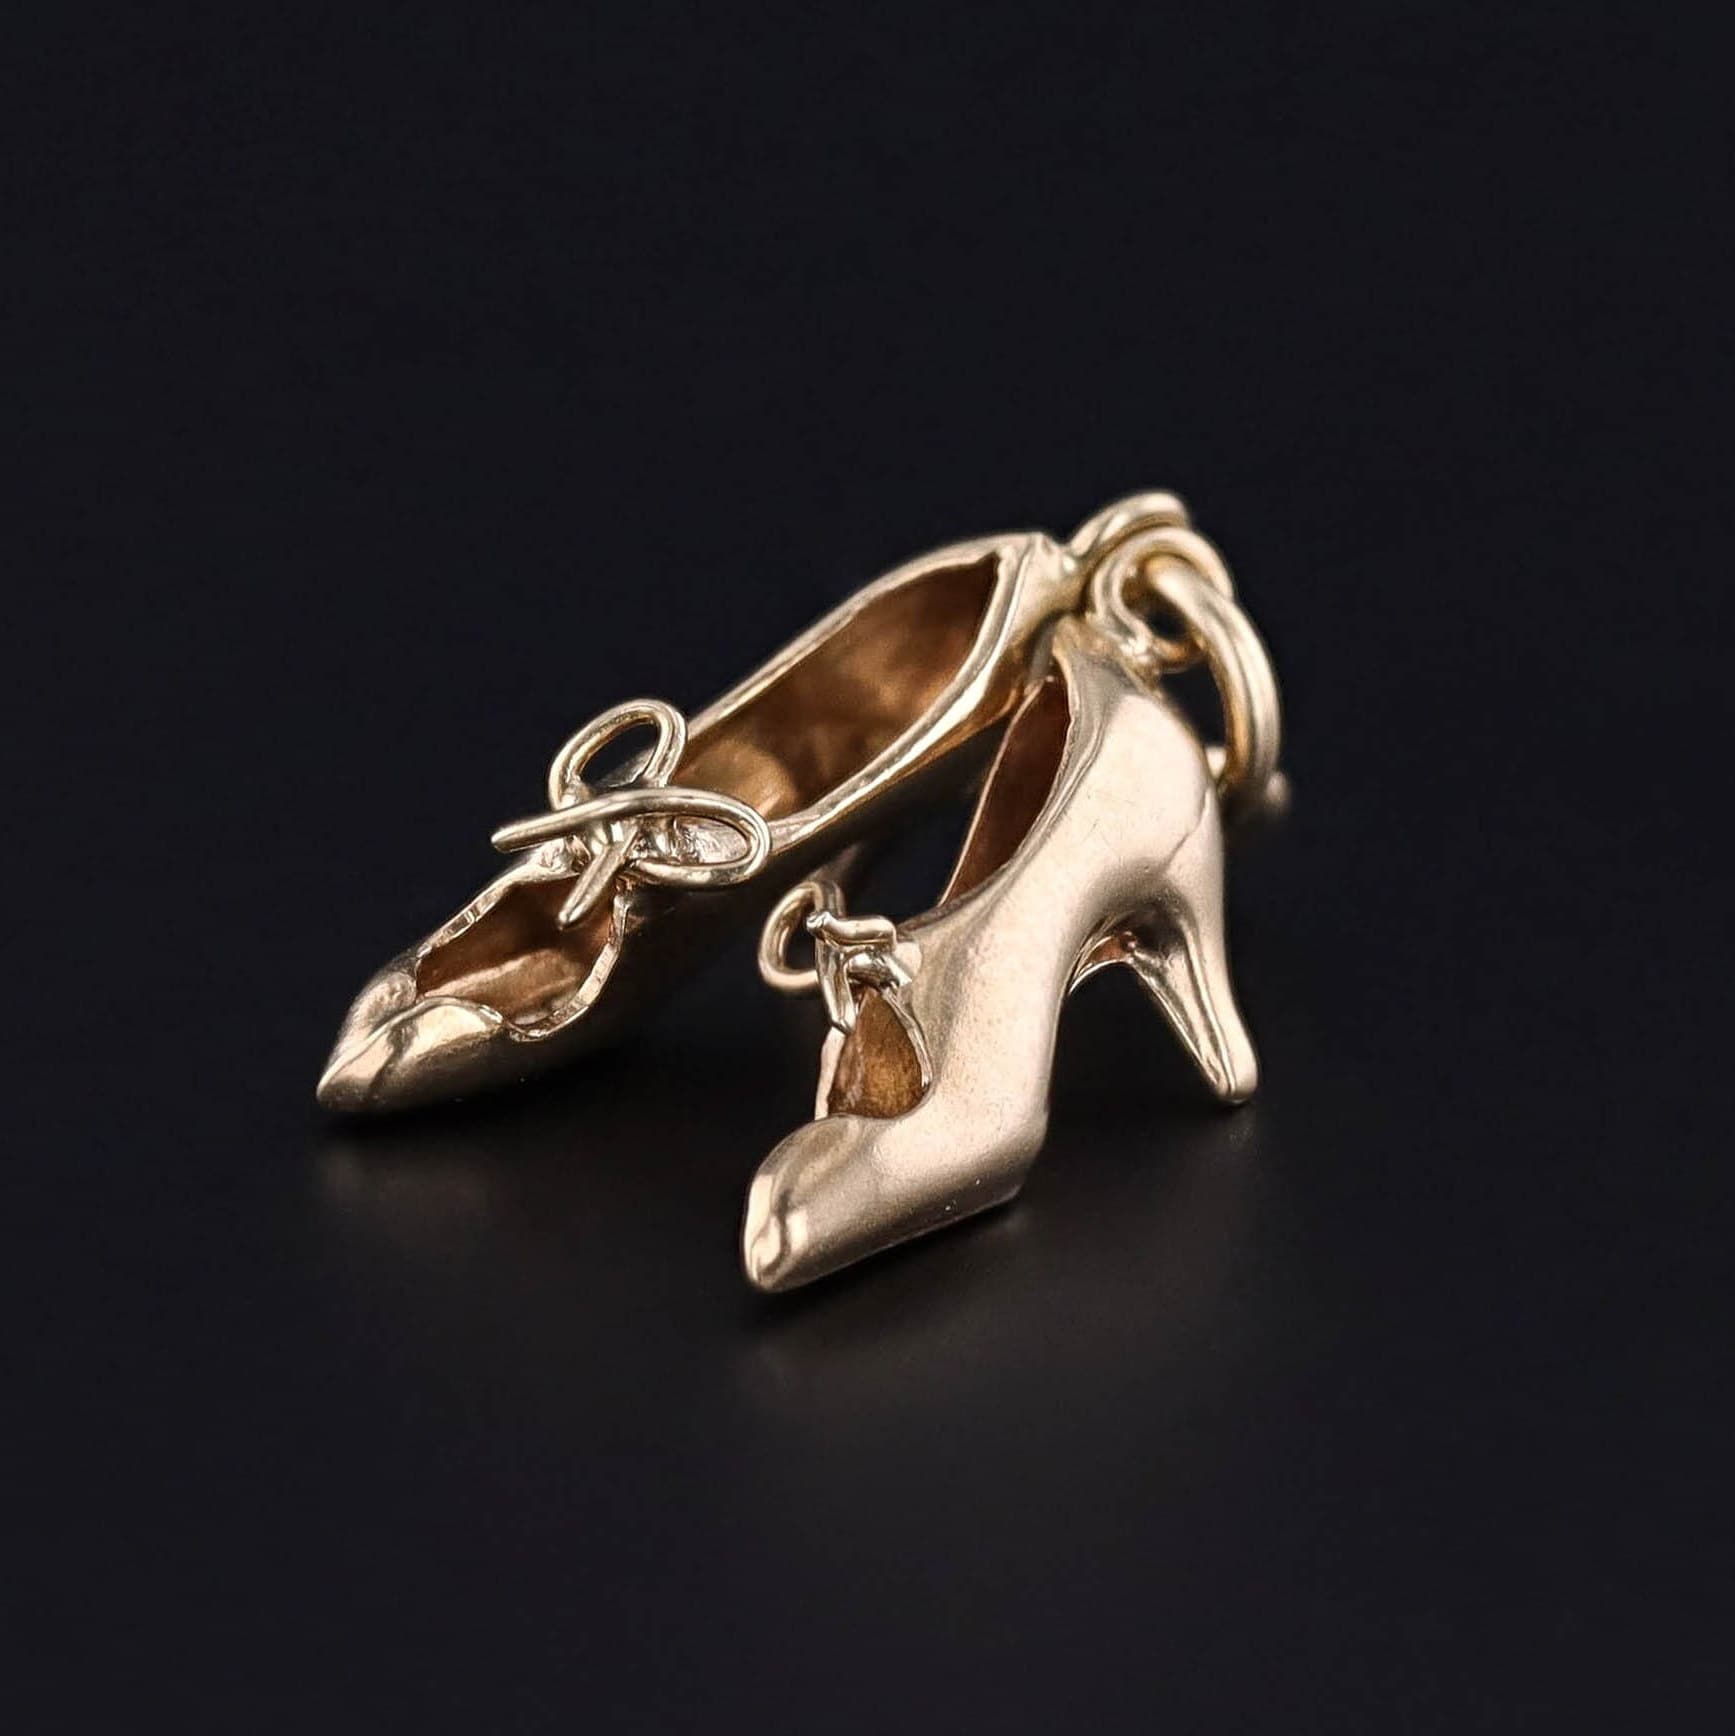 Vintage High Heels Shoe Charm of 9ct Gold